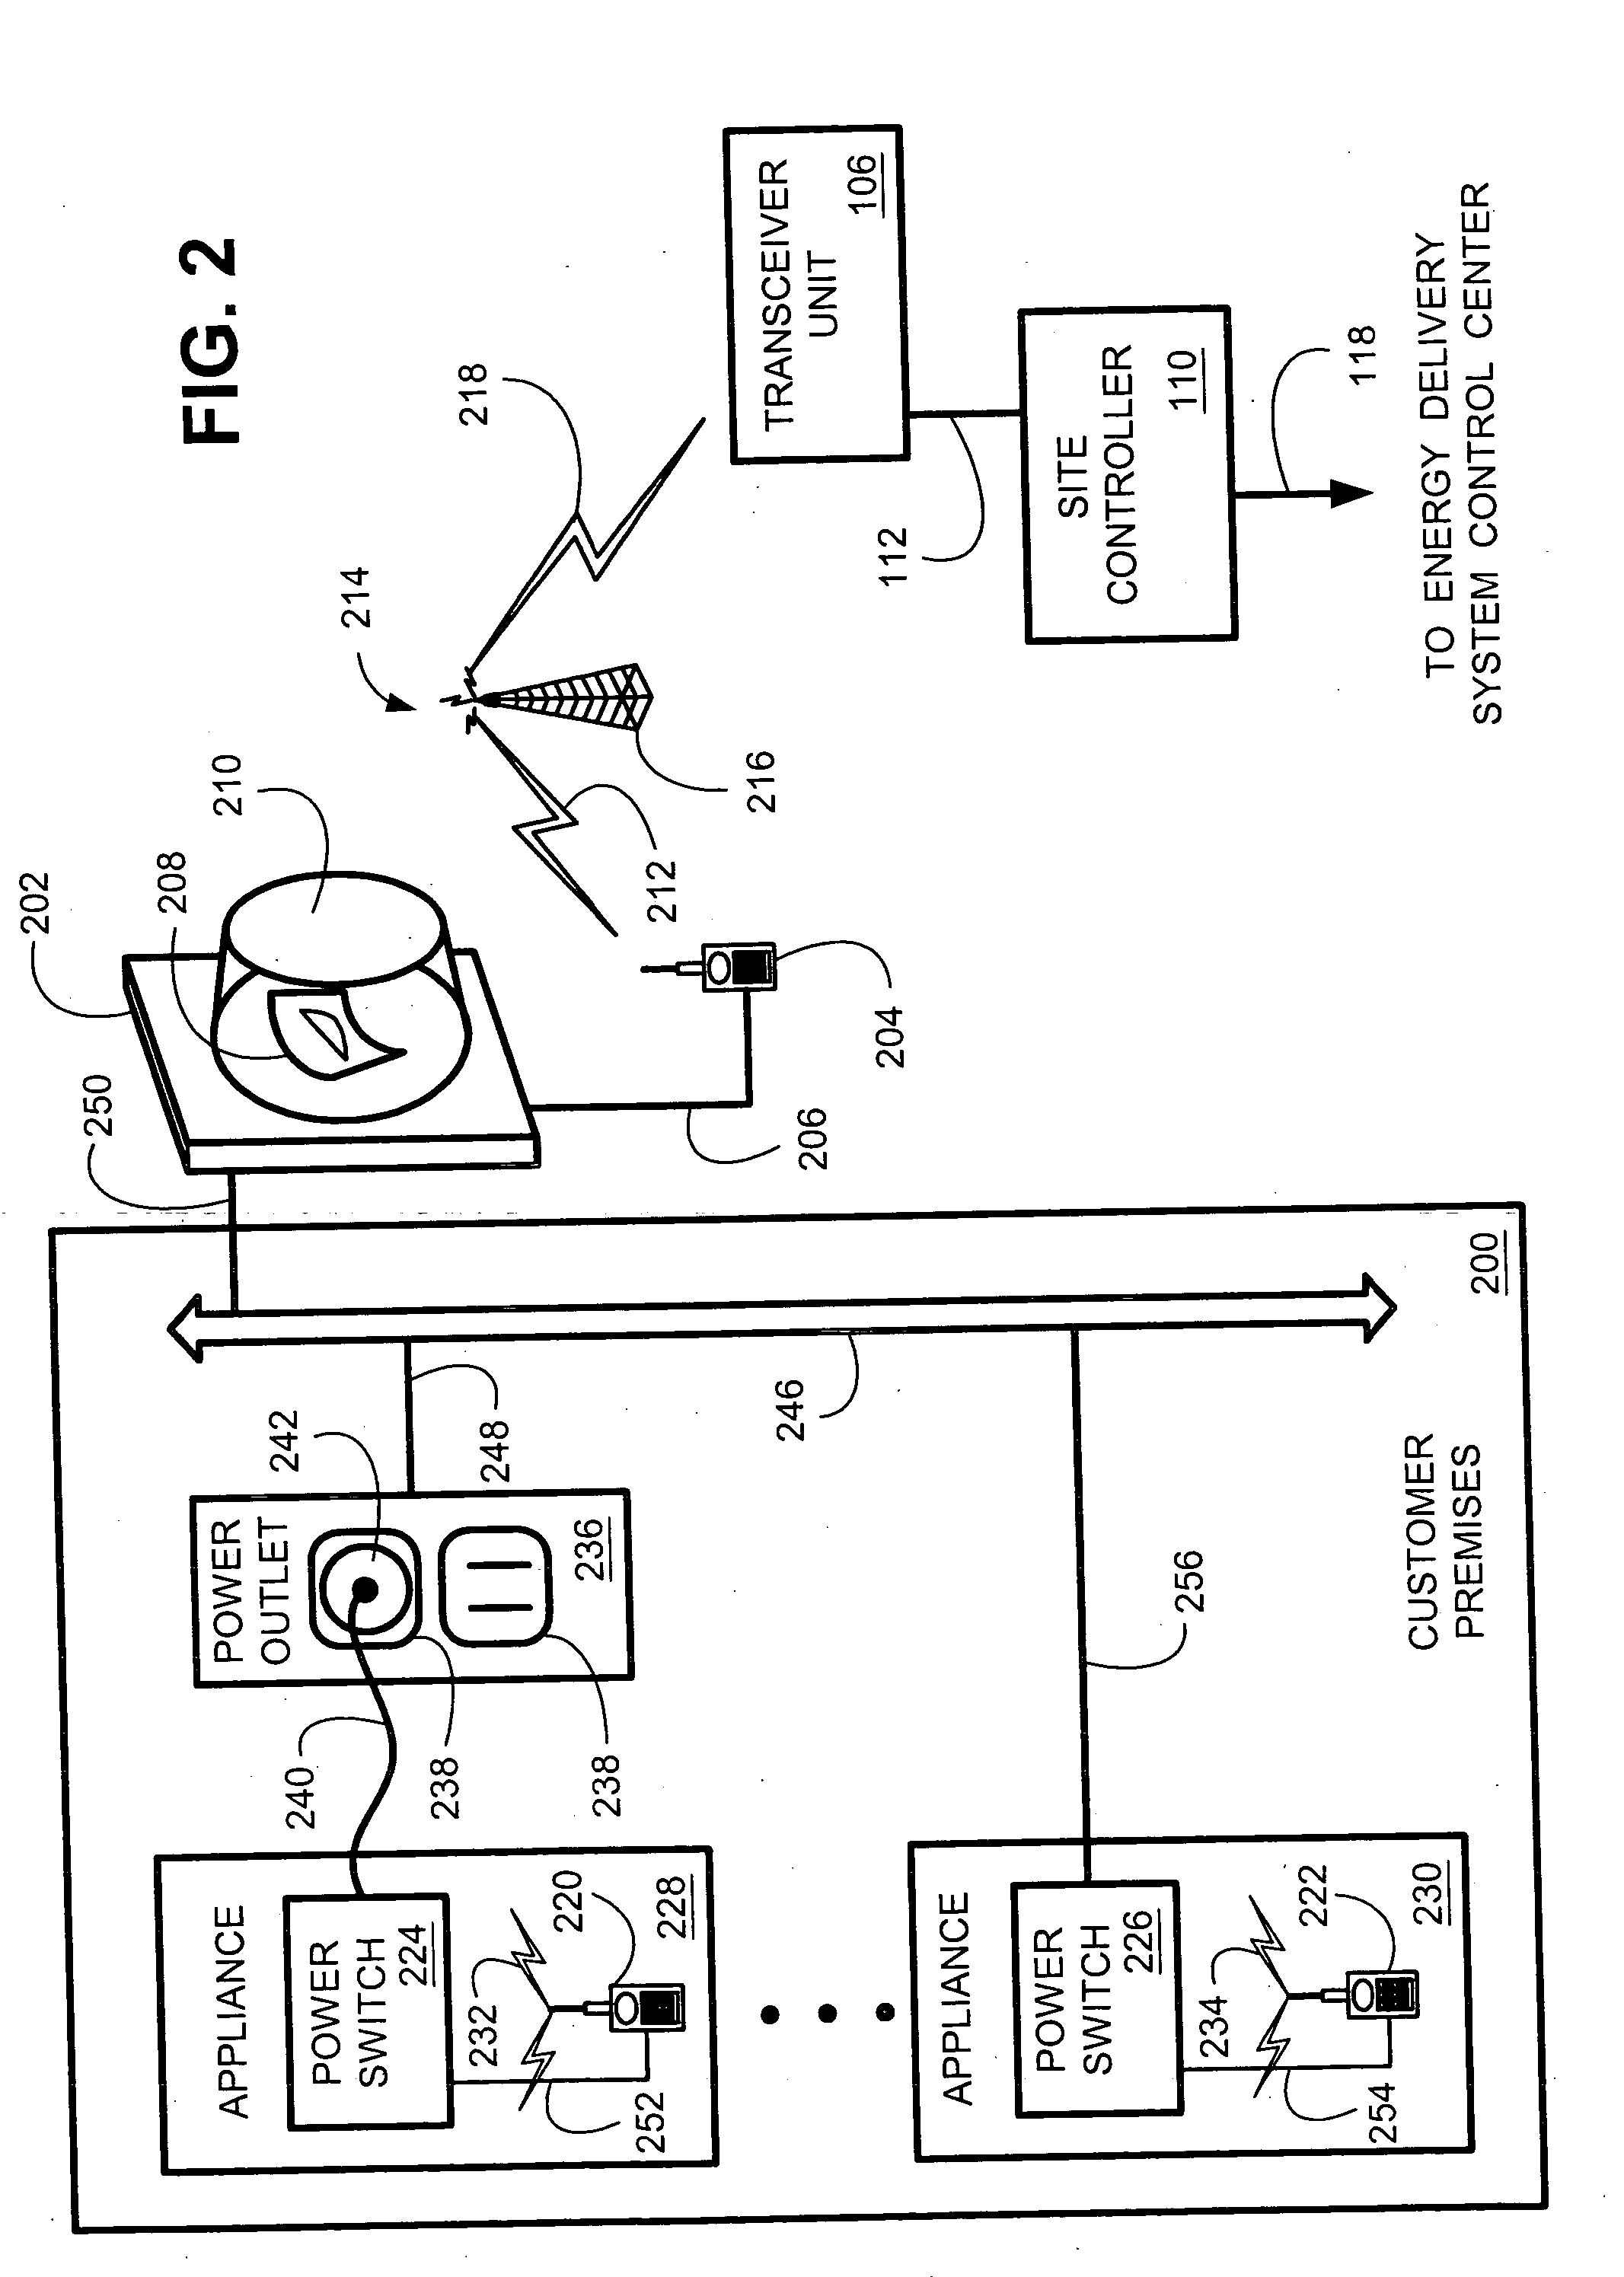 System and method for controlling generation over an integrated wireless network